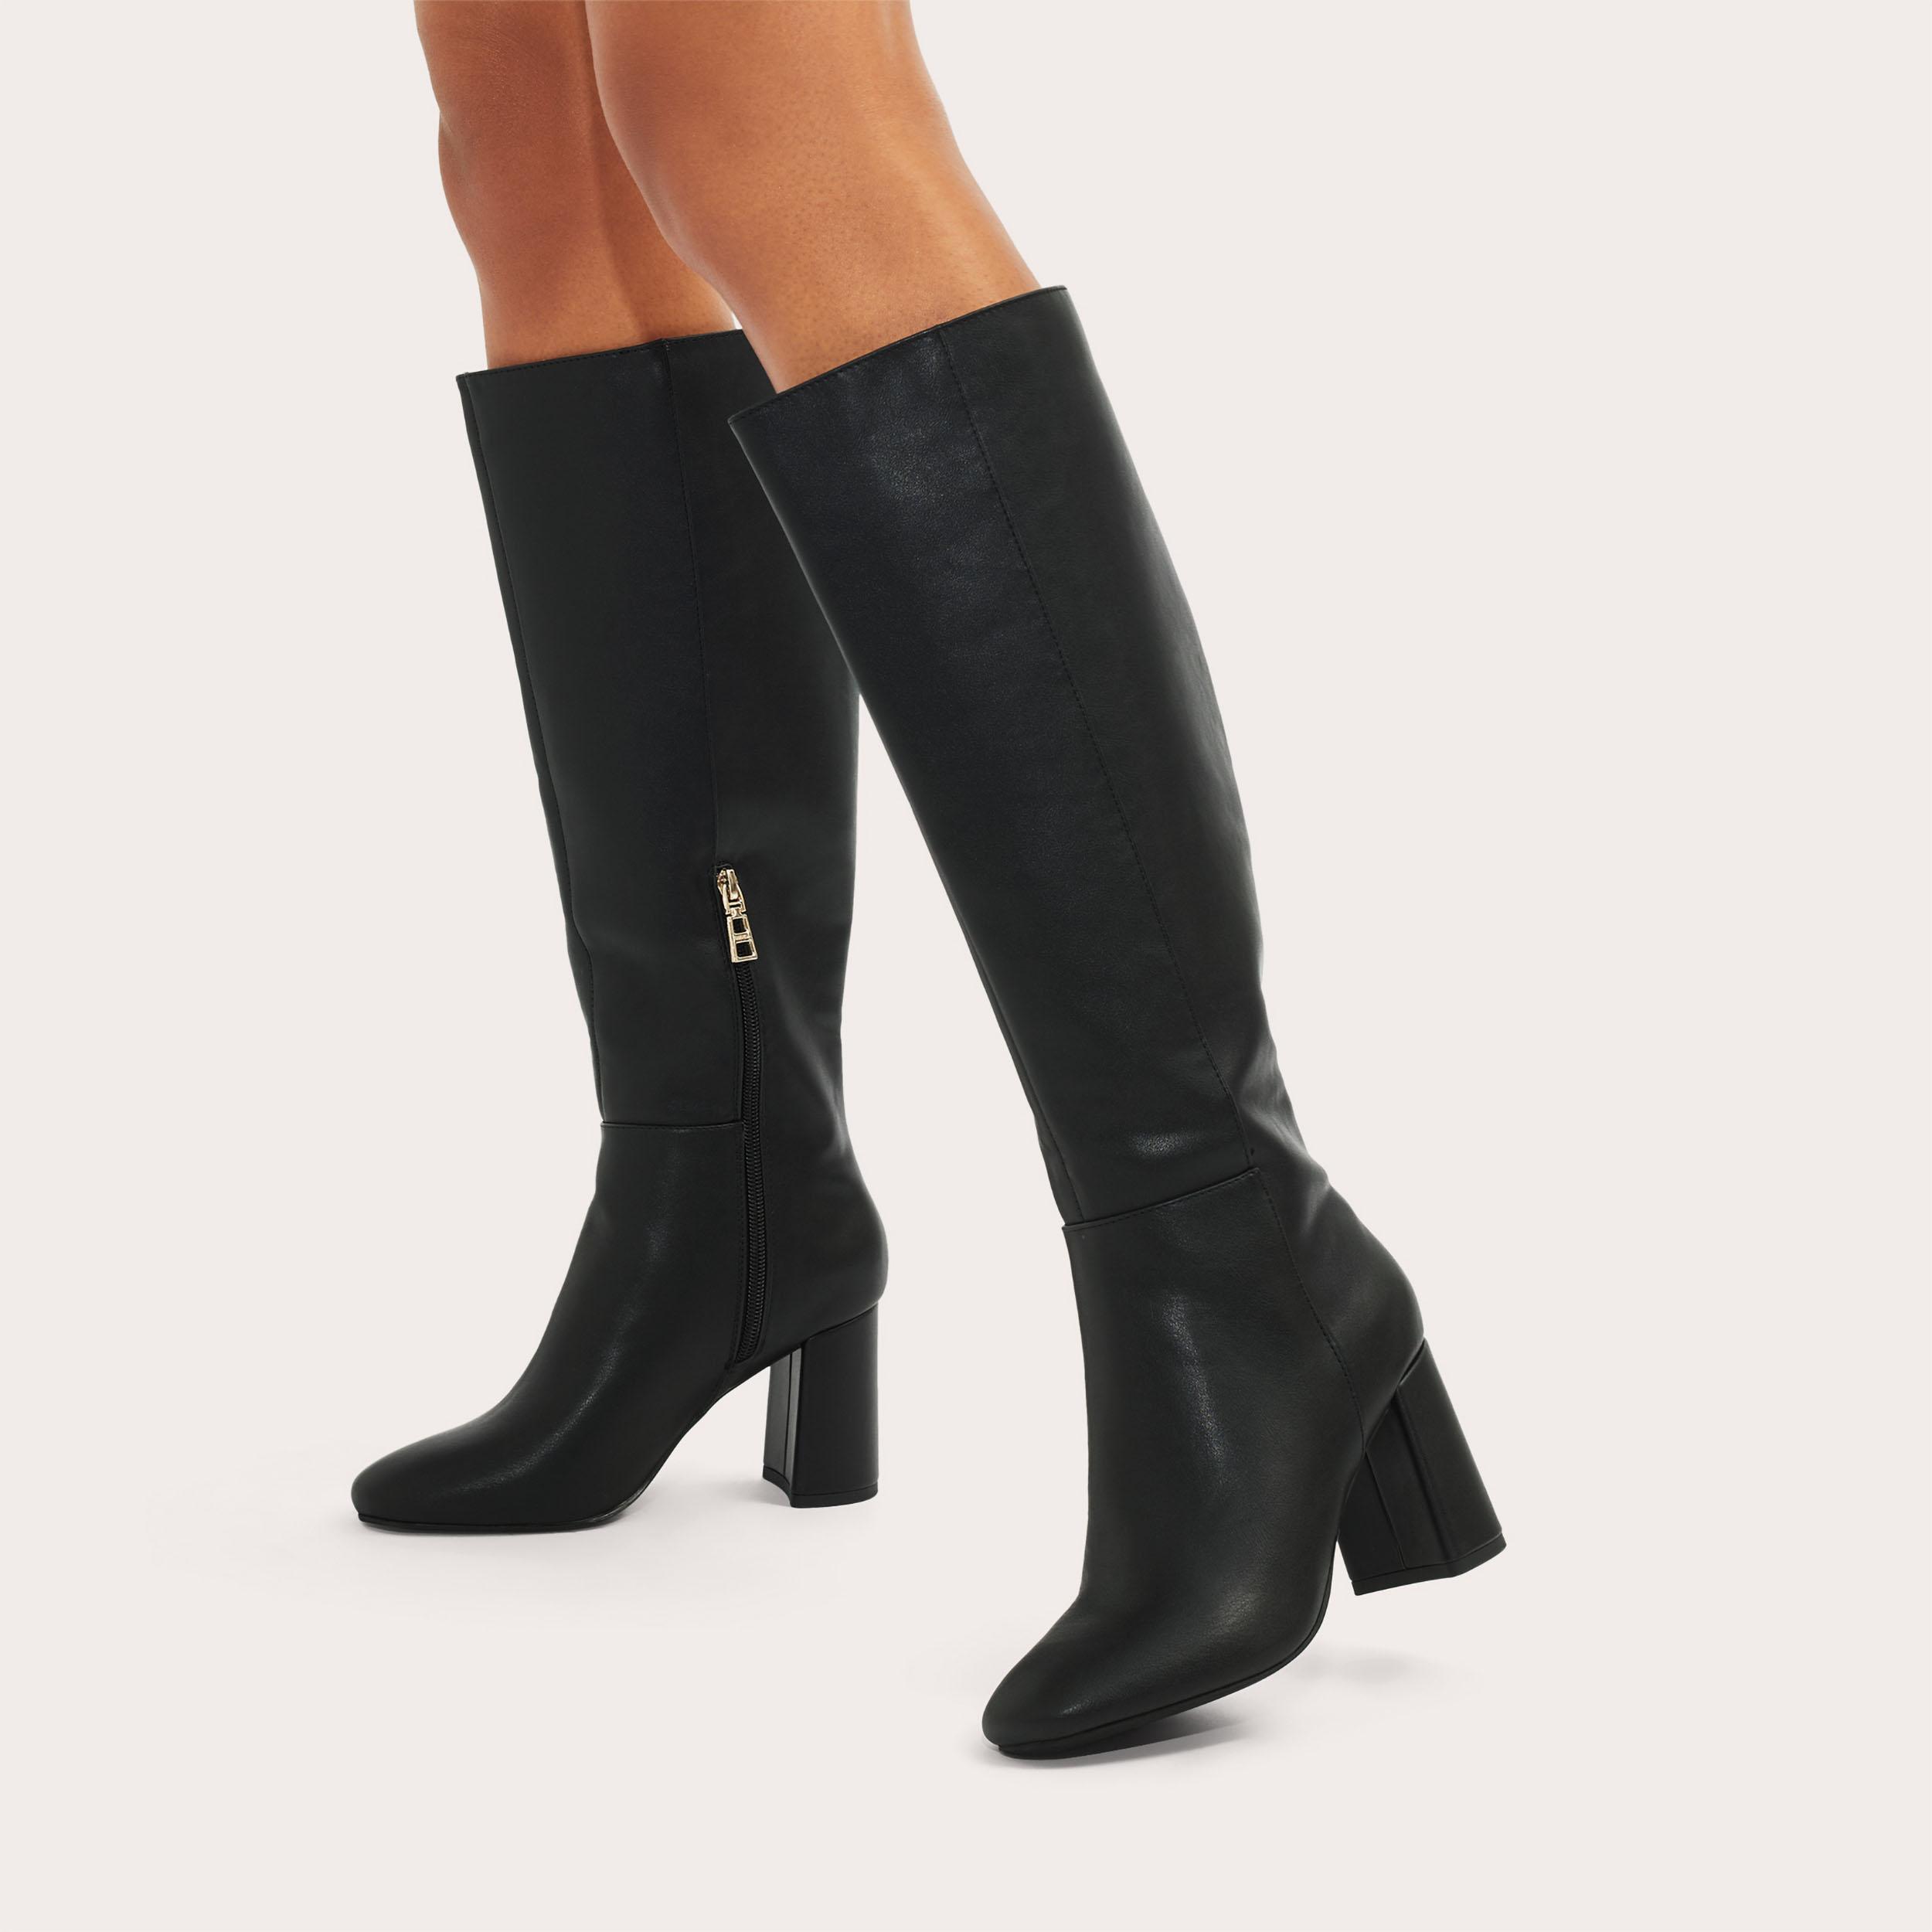 Reelee Black Square Toe Knee-High Boots